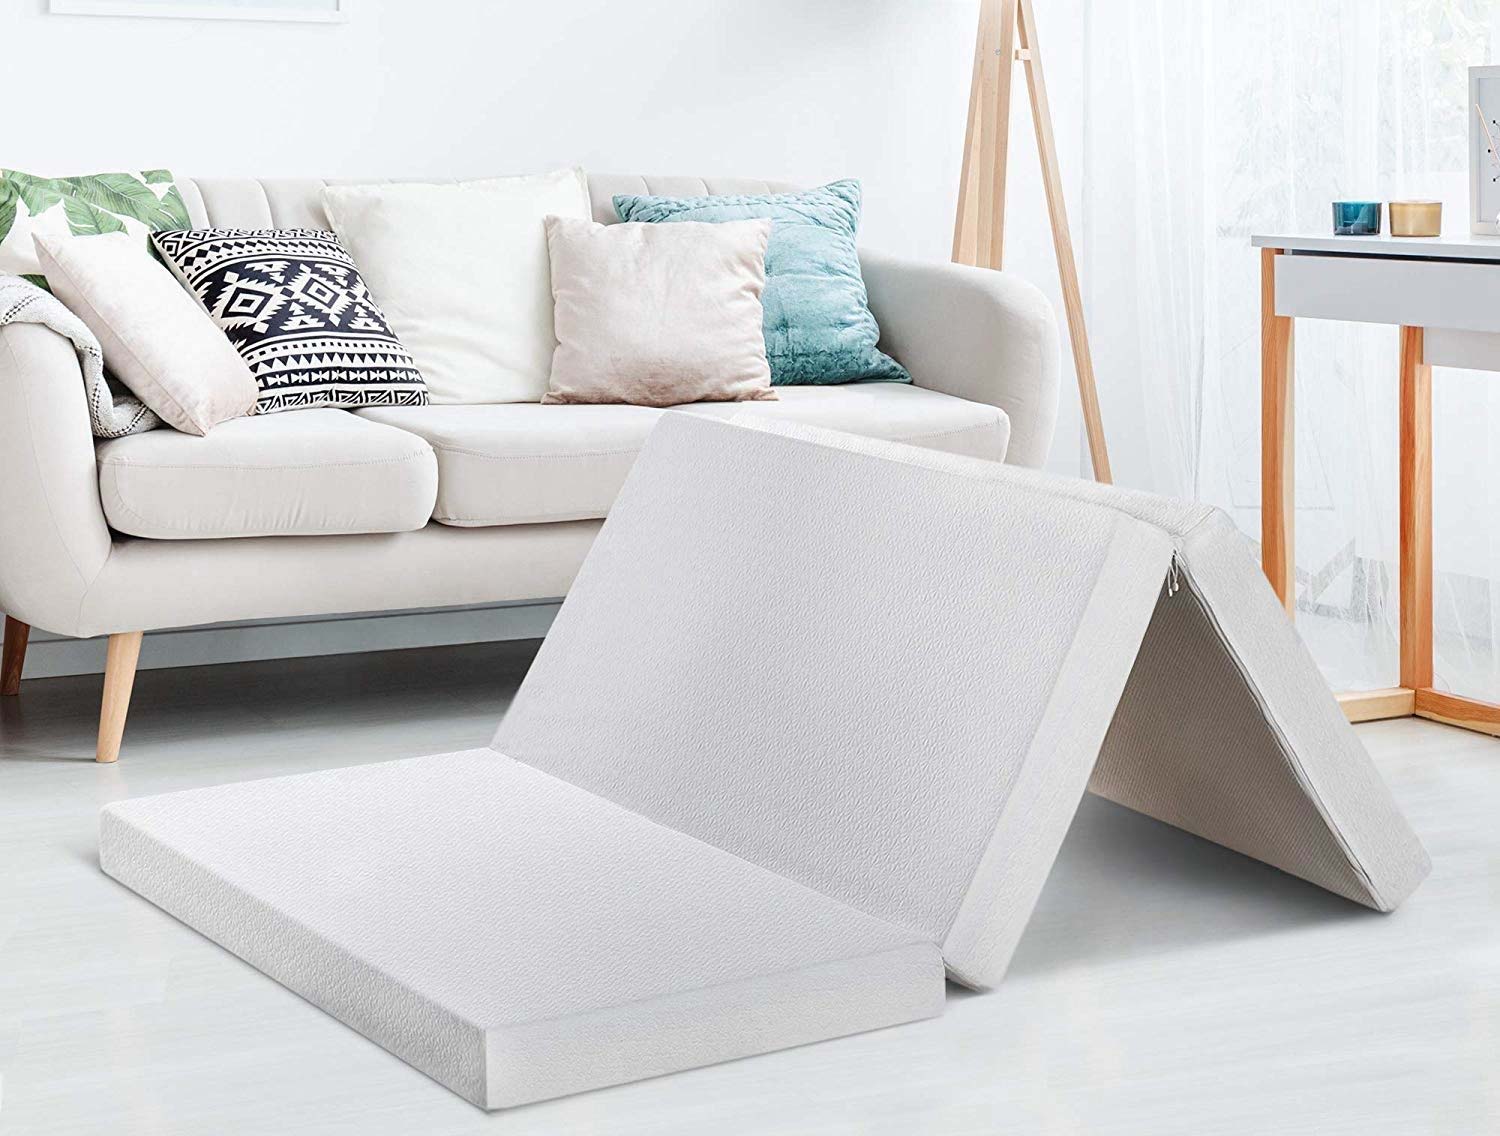 mattresses that can be folded